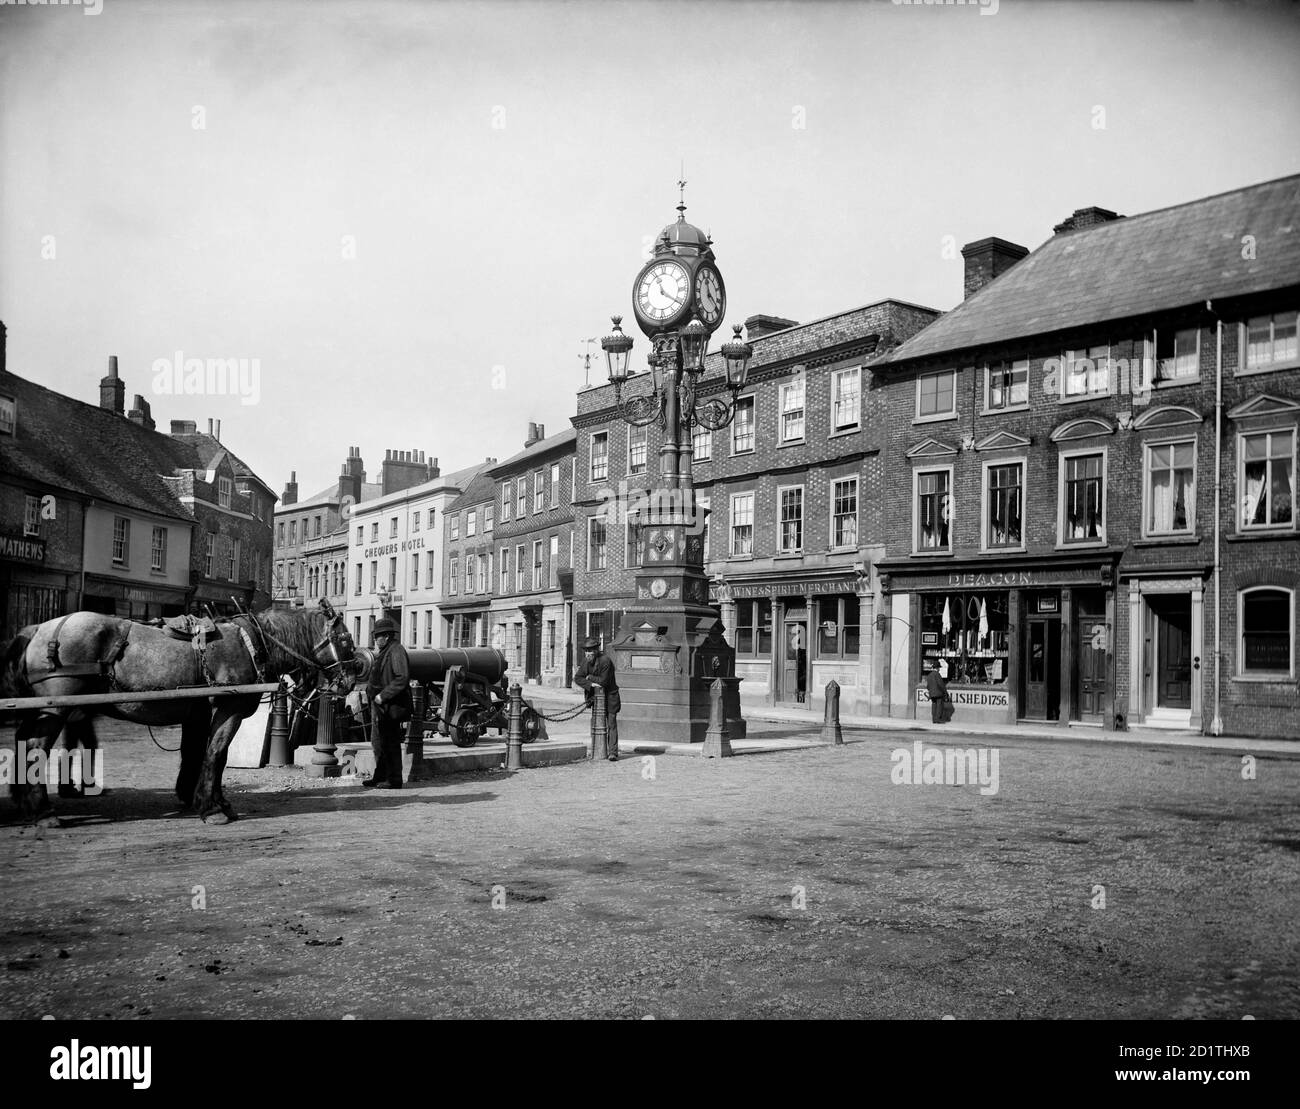 NEWBURY, Berkshire. The clock that commemorates the Golden Jubilee of Queen Victoria (1887) stands at the three-way junction of the London and Bath roads in the town. Photographed in 1890 by Henry Taunt. Stock Photo